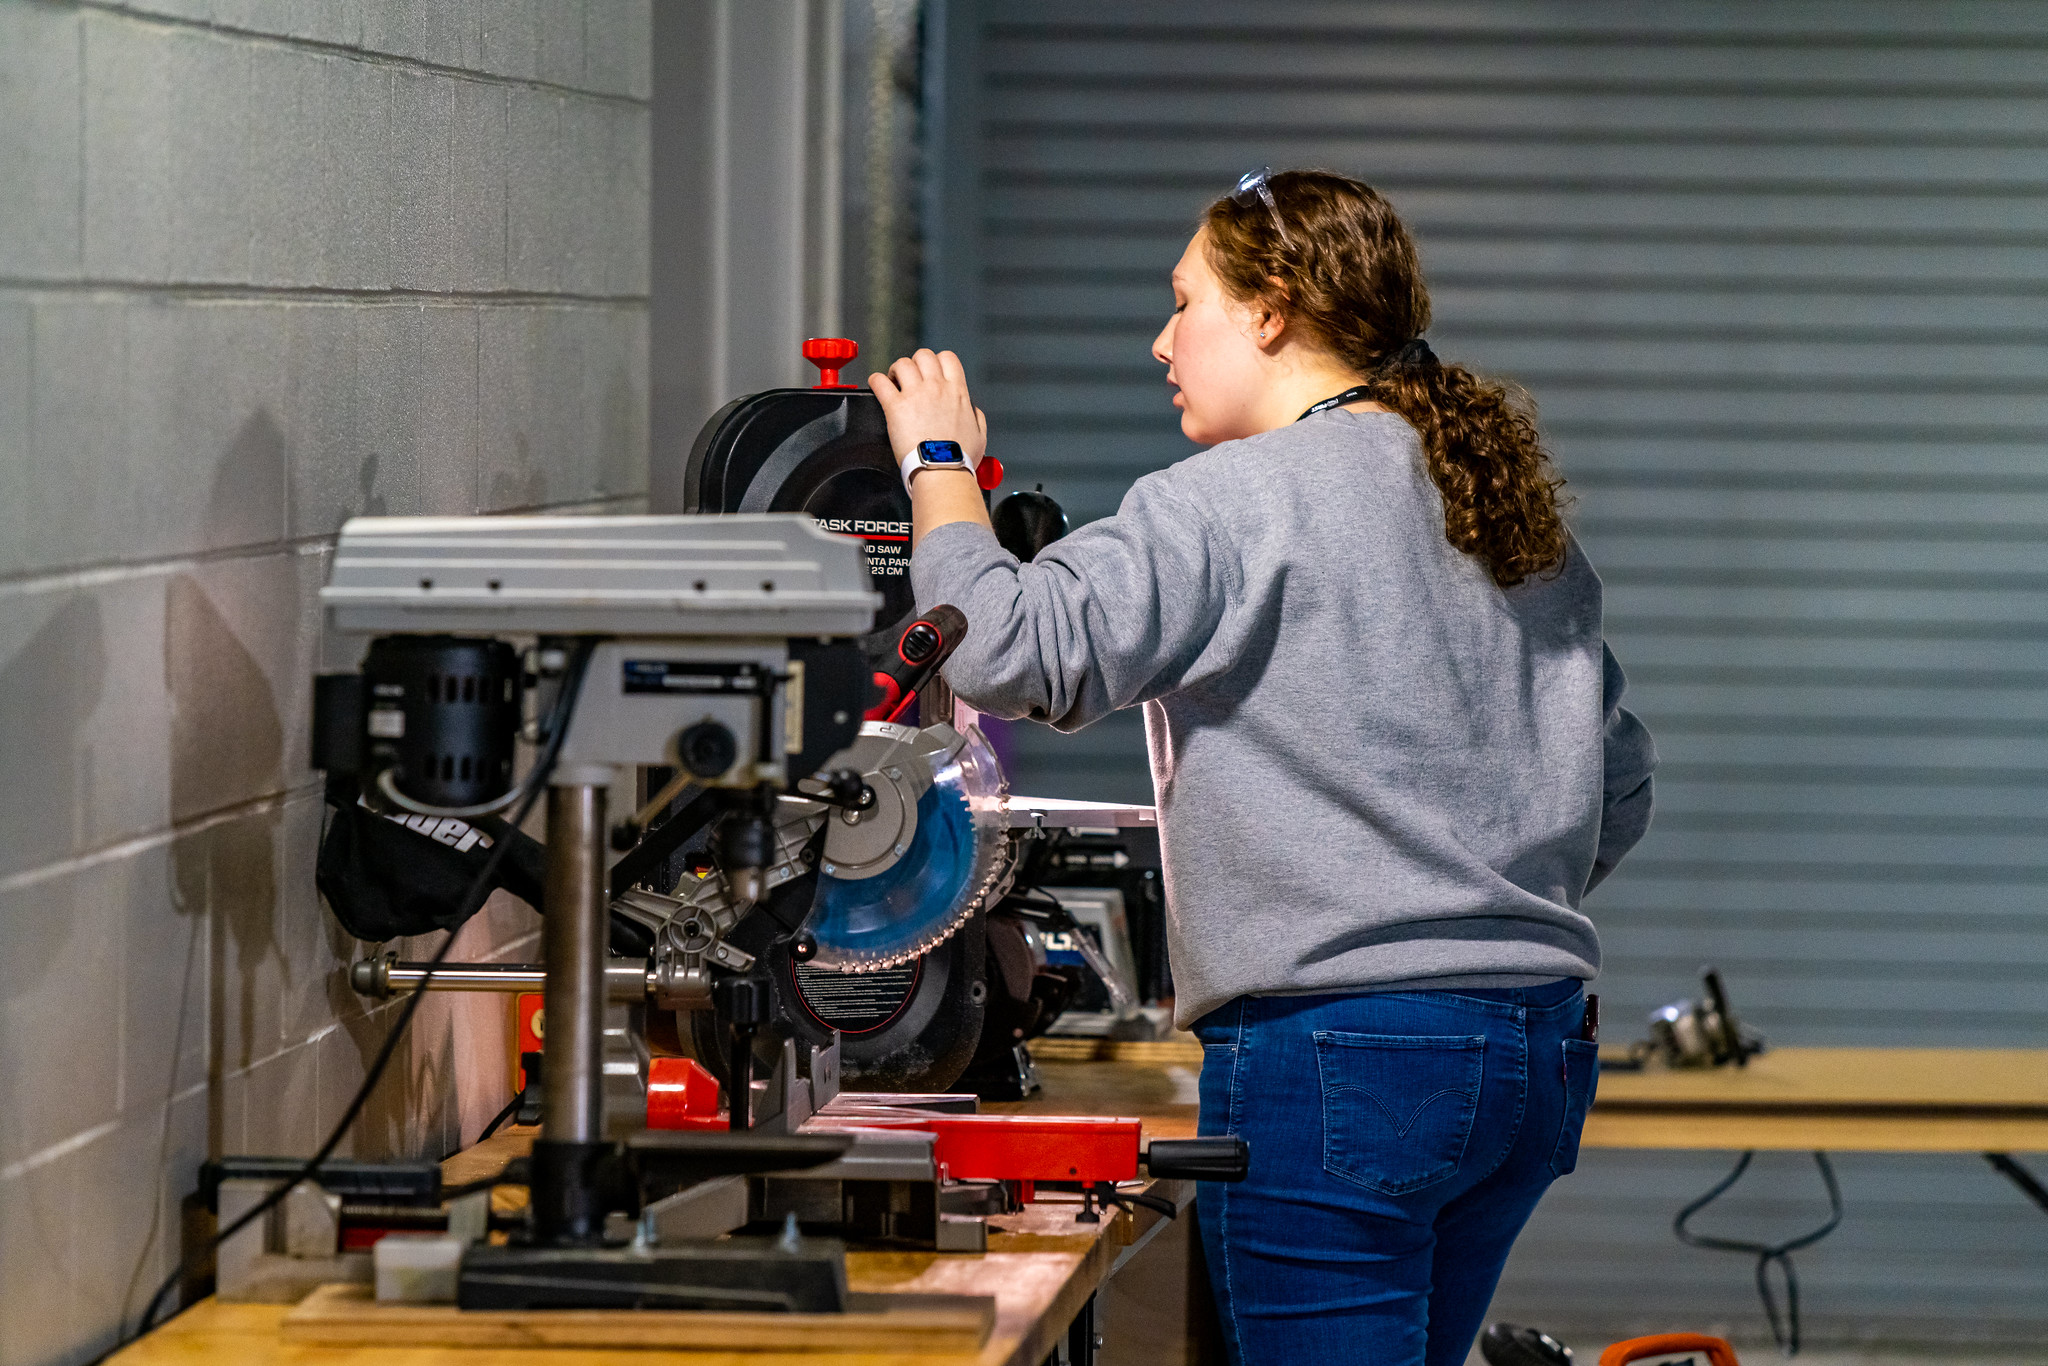 Applied Engineering and Technical Management Student volunteering in the Iowa Regional Machine Shop, which aids teams when a robot part breaks.